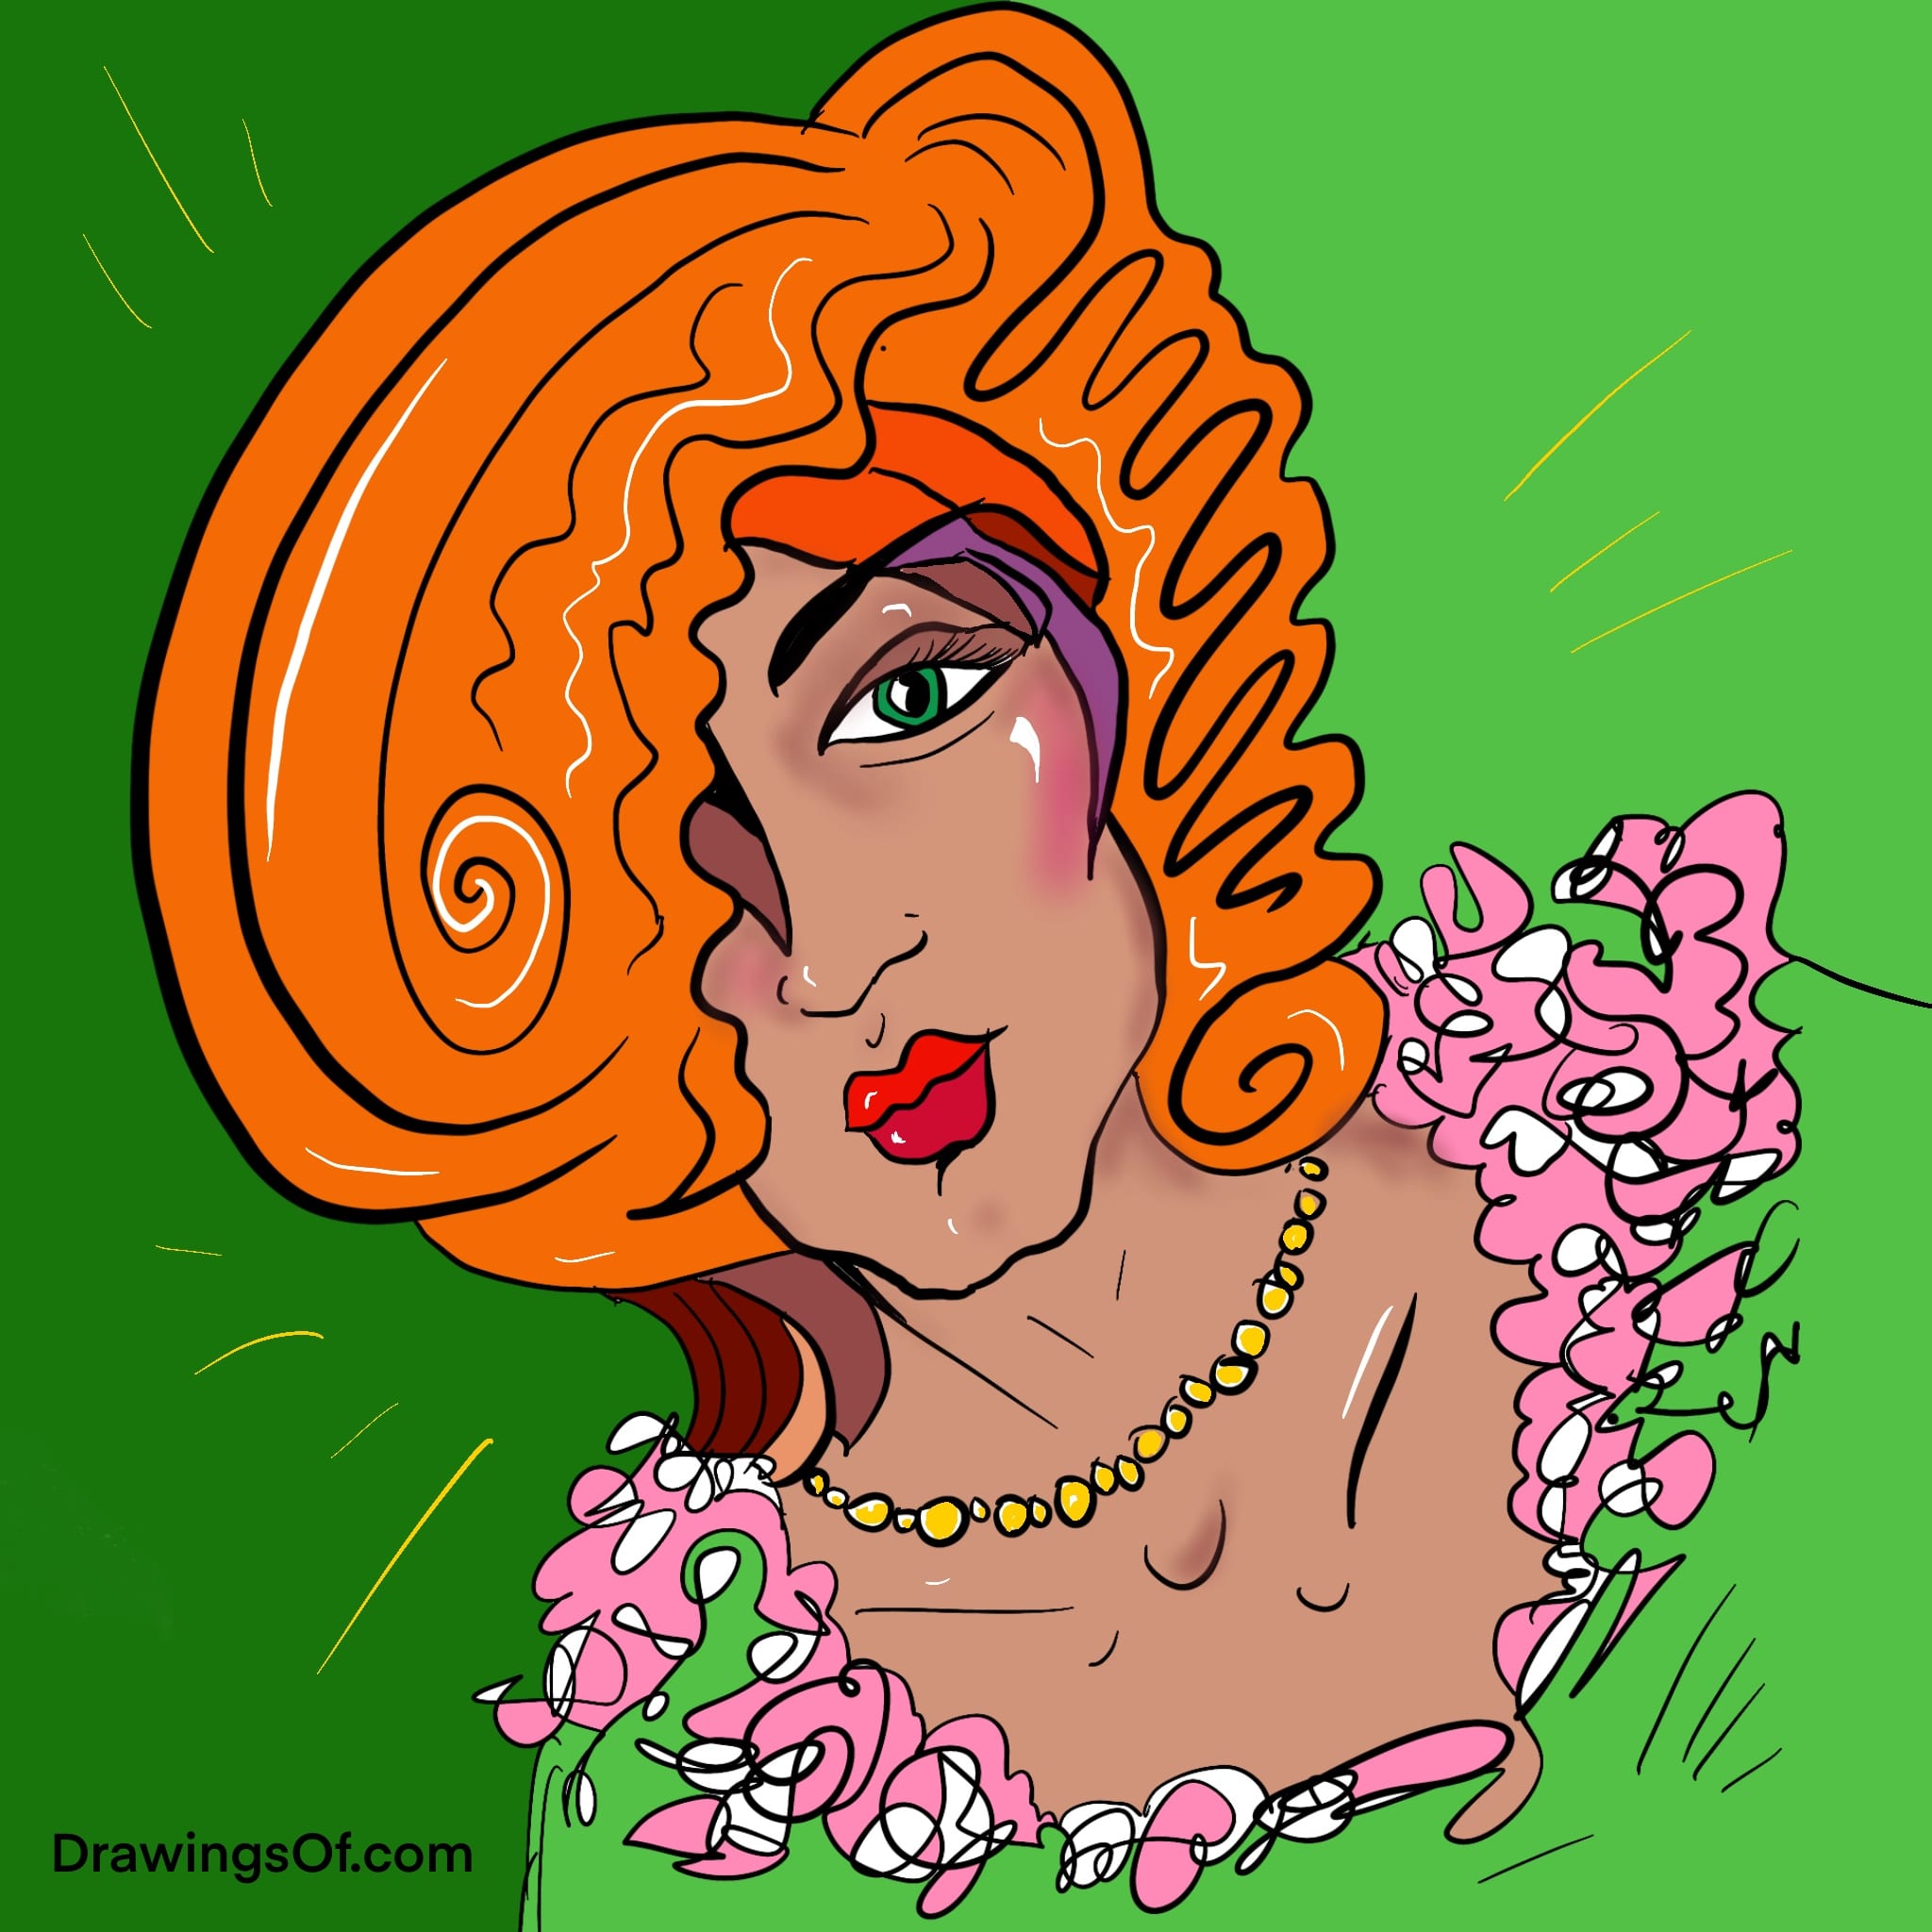 Drawing of orange hair, yellow pearls, and a green dress.